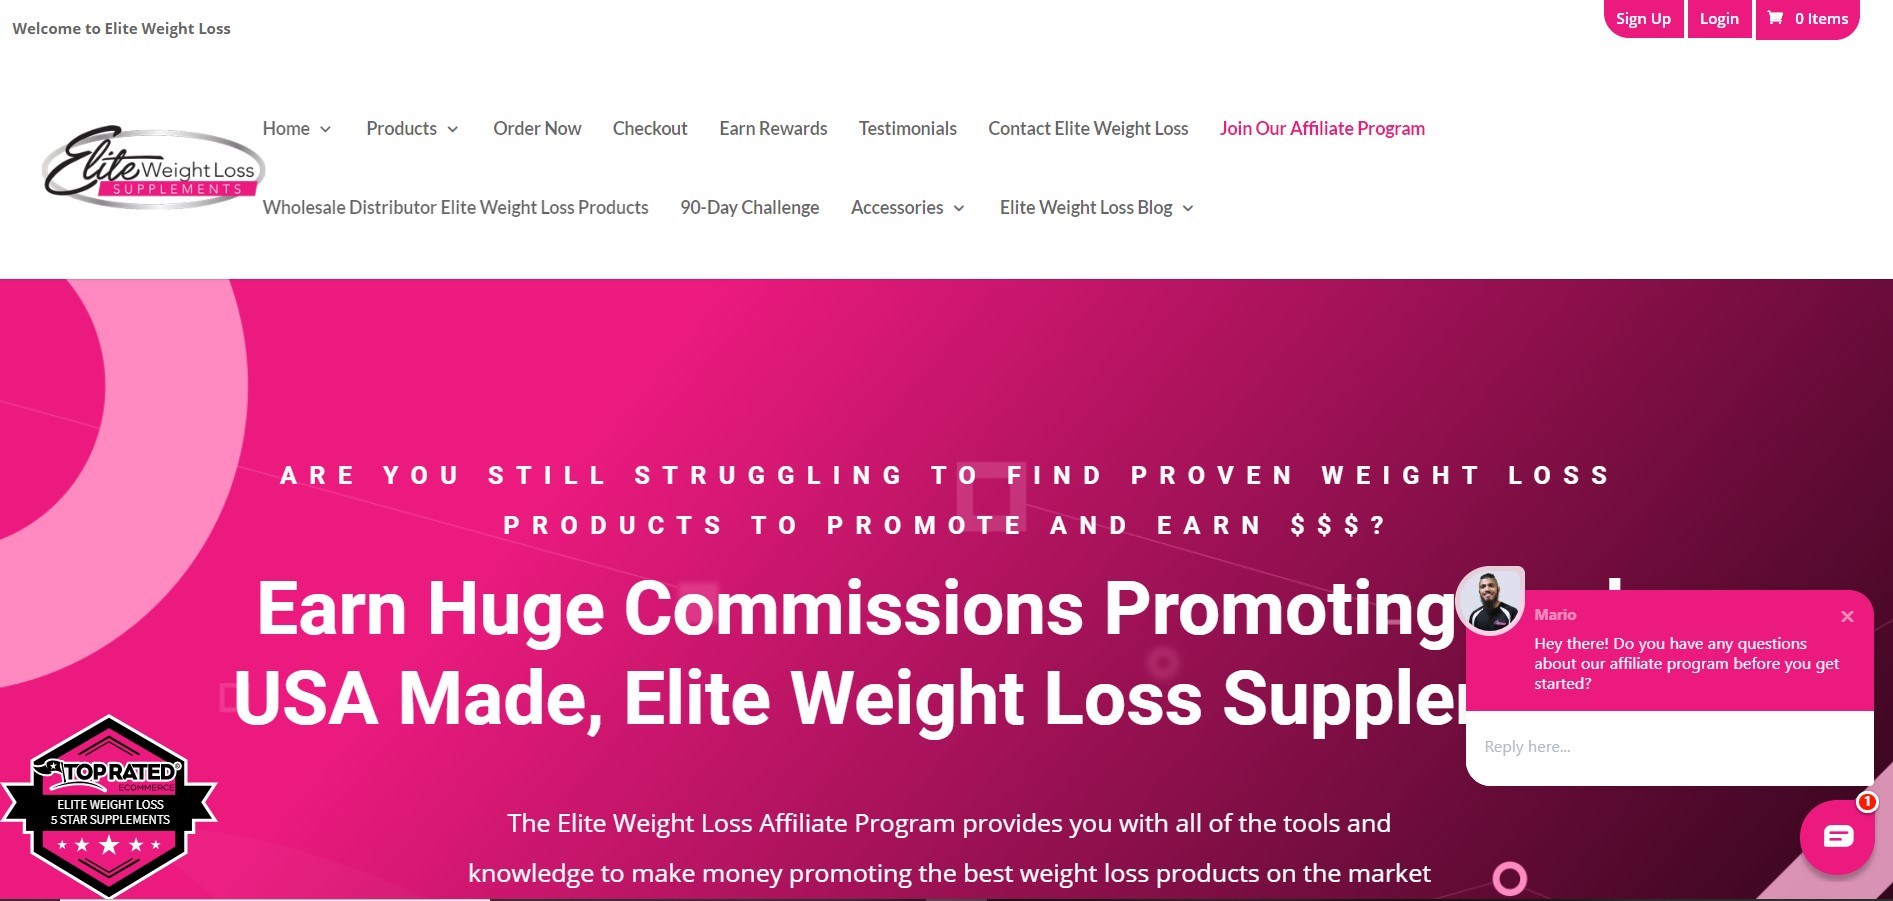 This screenshot shows a hot pink background with white-lettered text promoting the Elite Weight Loss supplements.